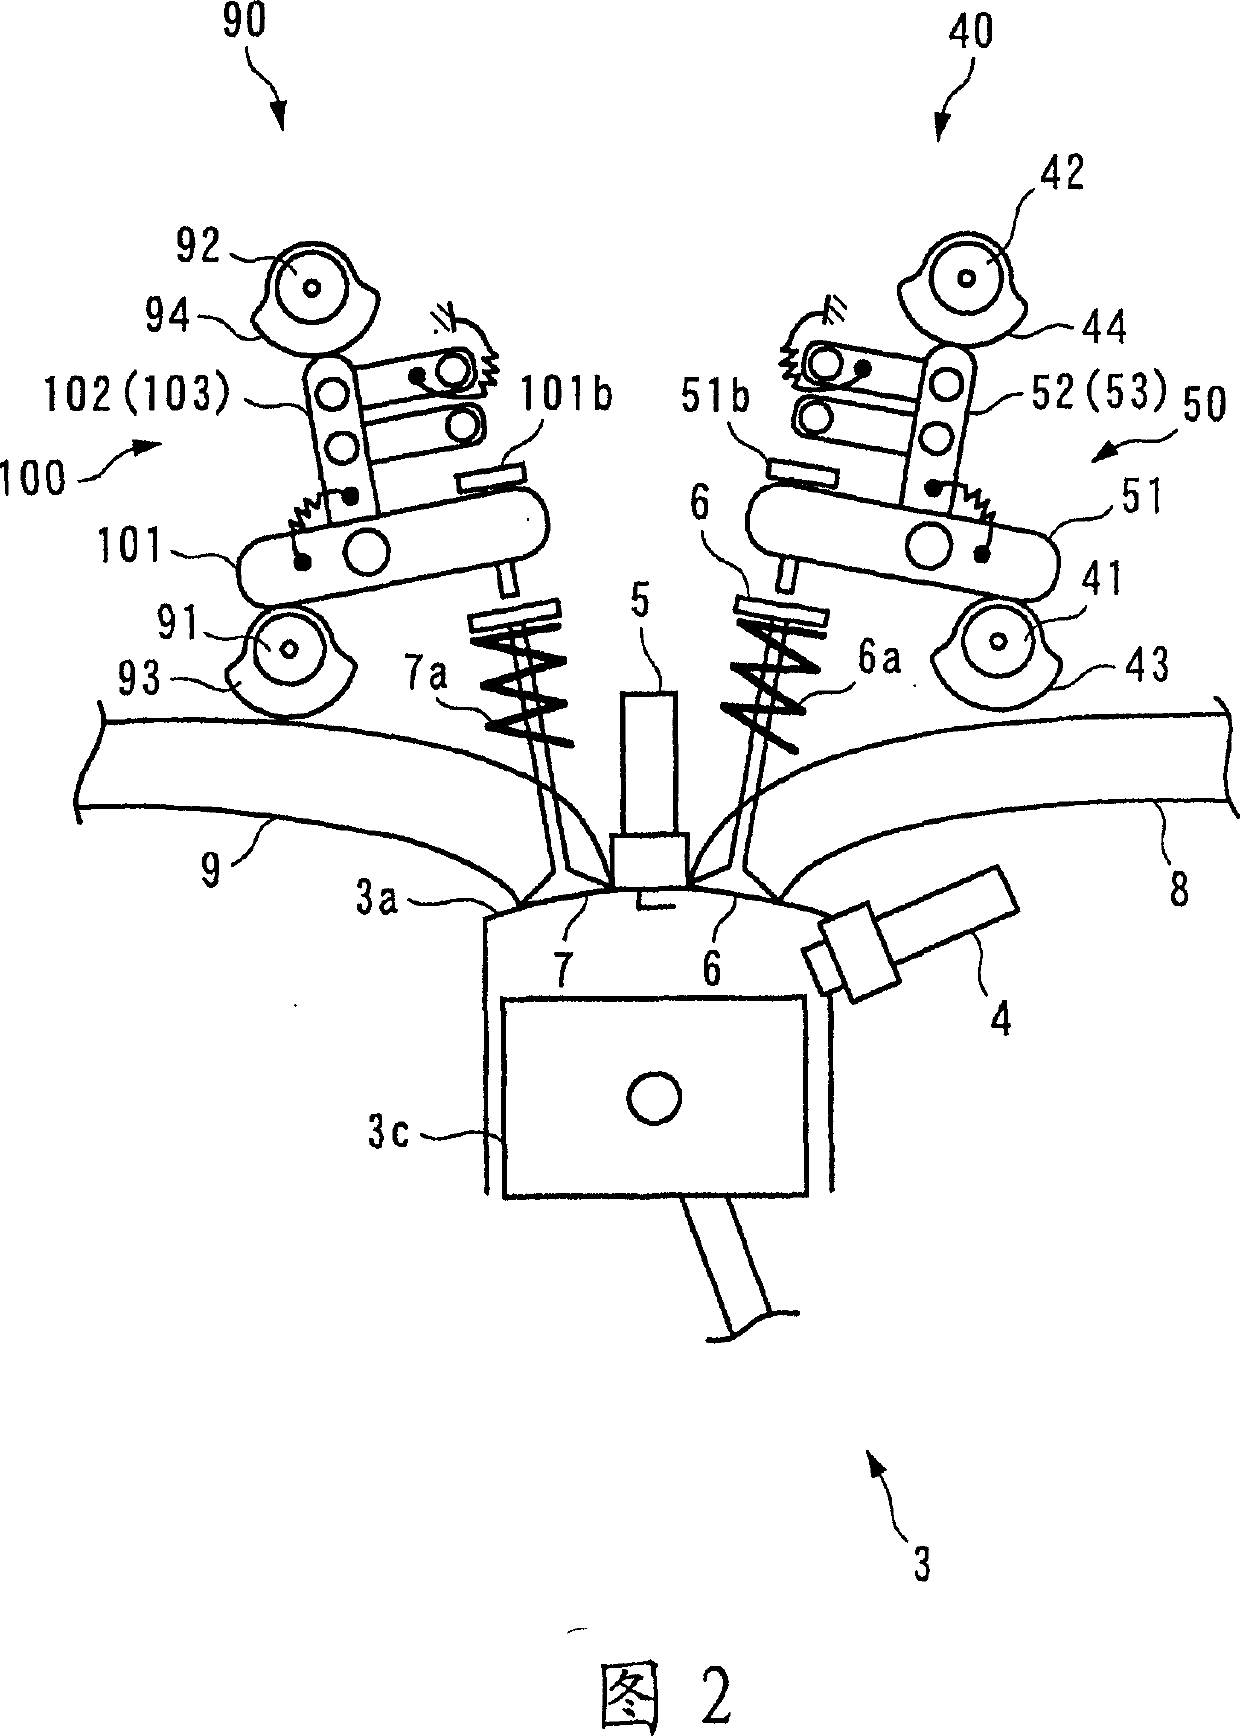 Intake air volume controller of internal combustion engine